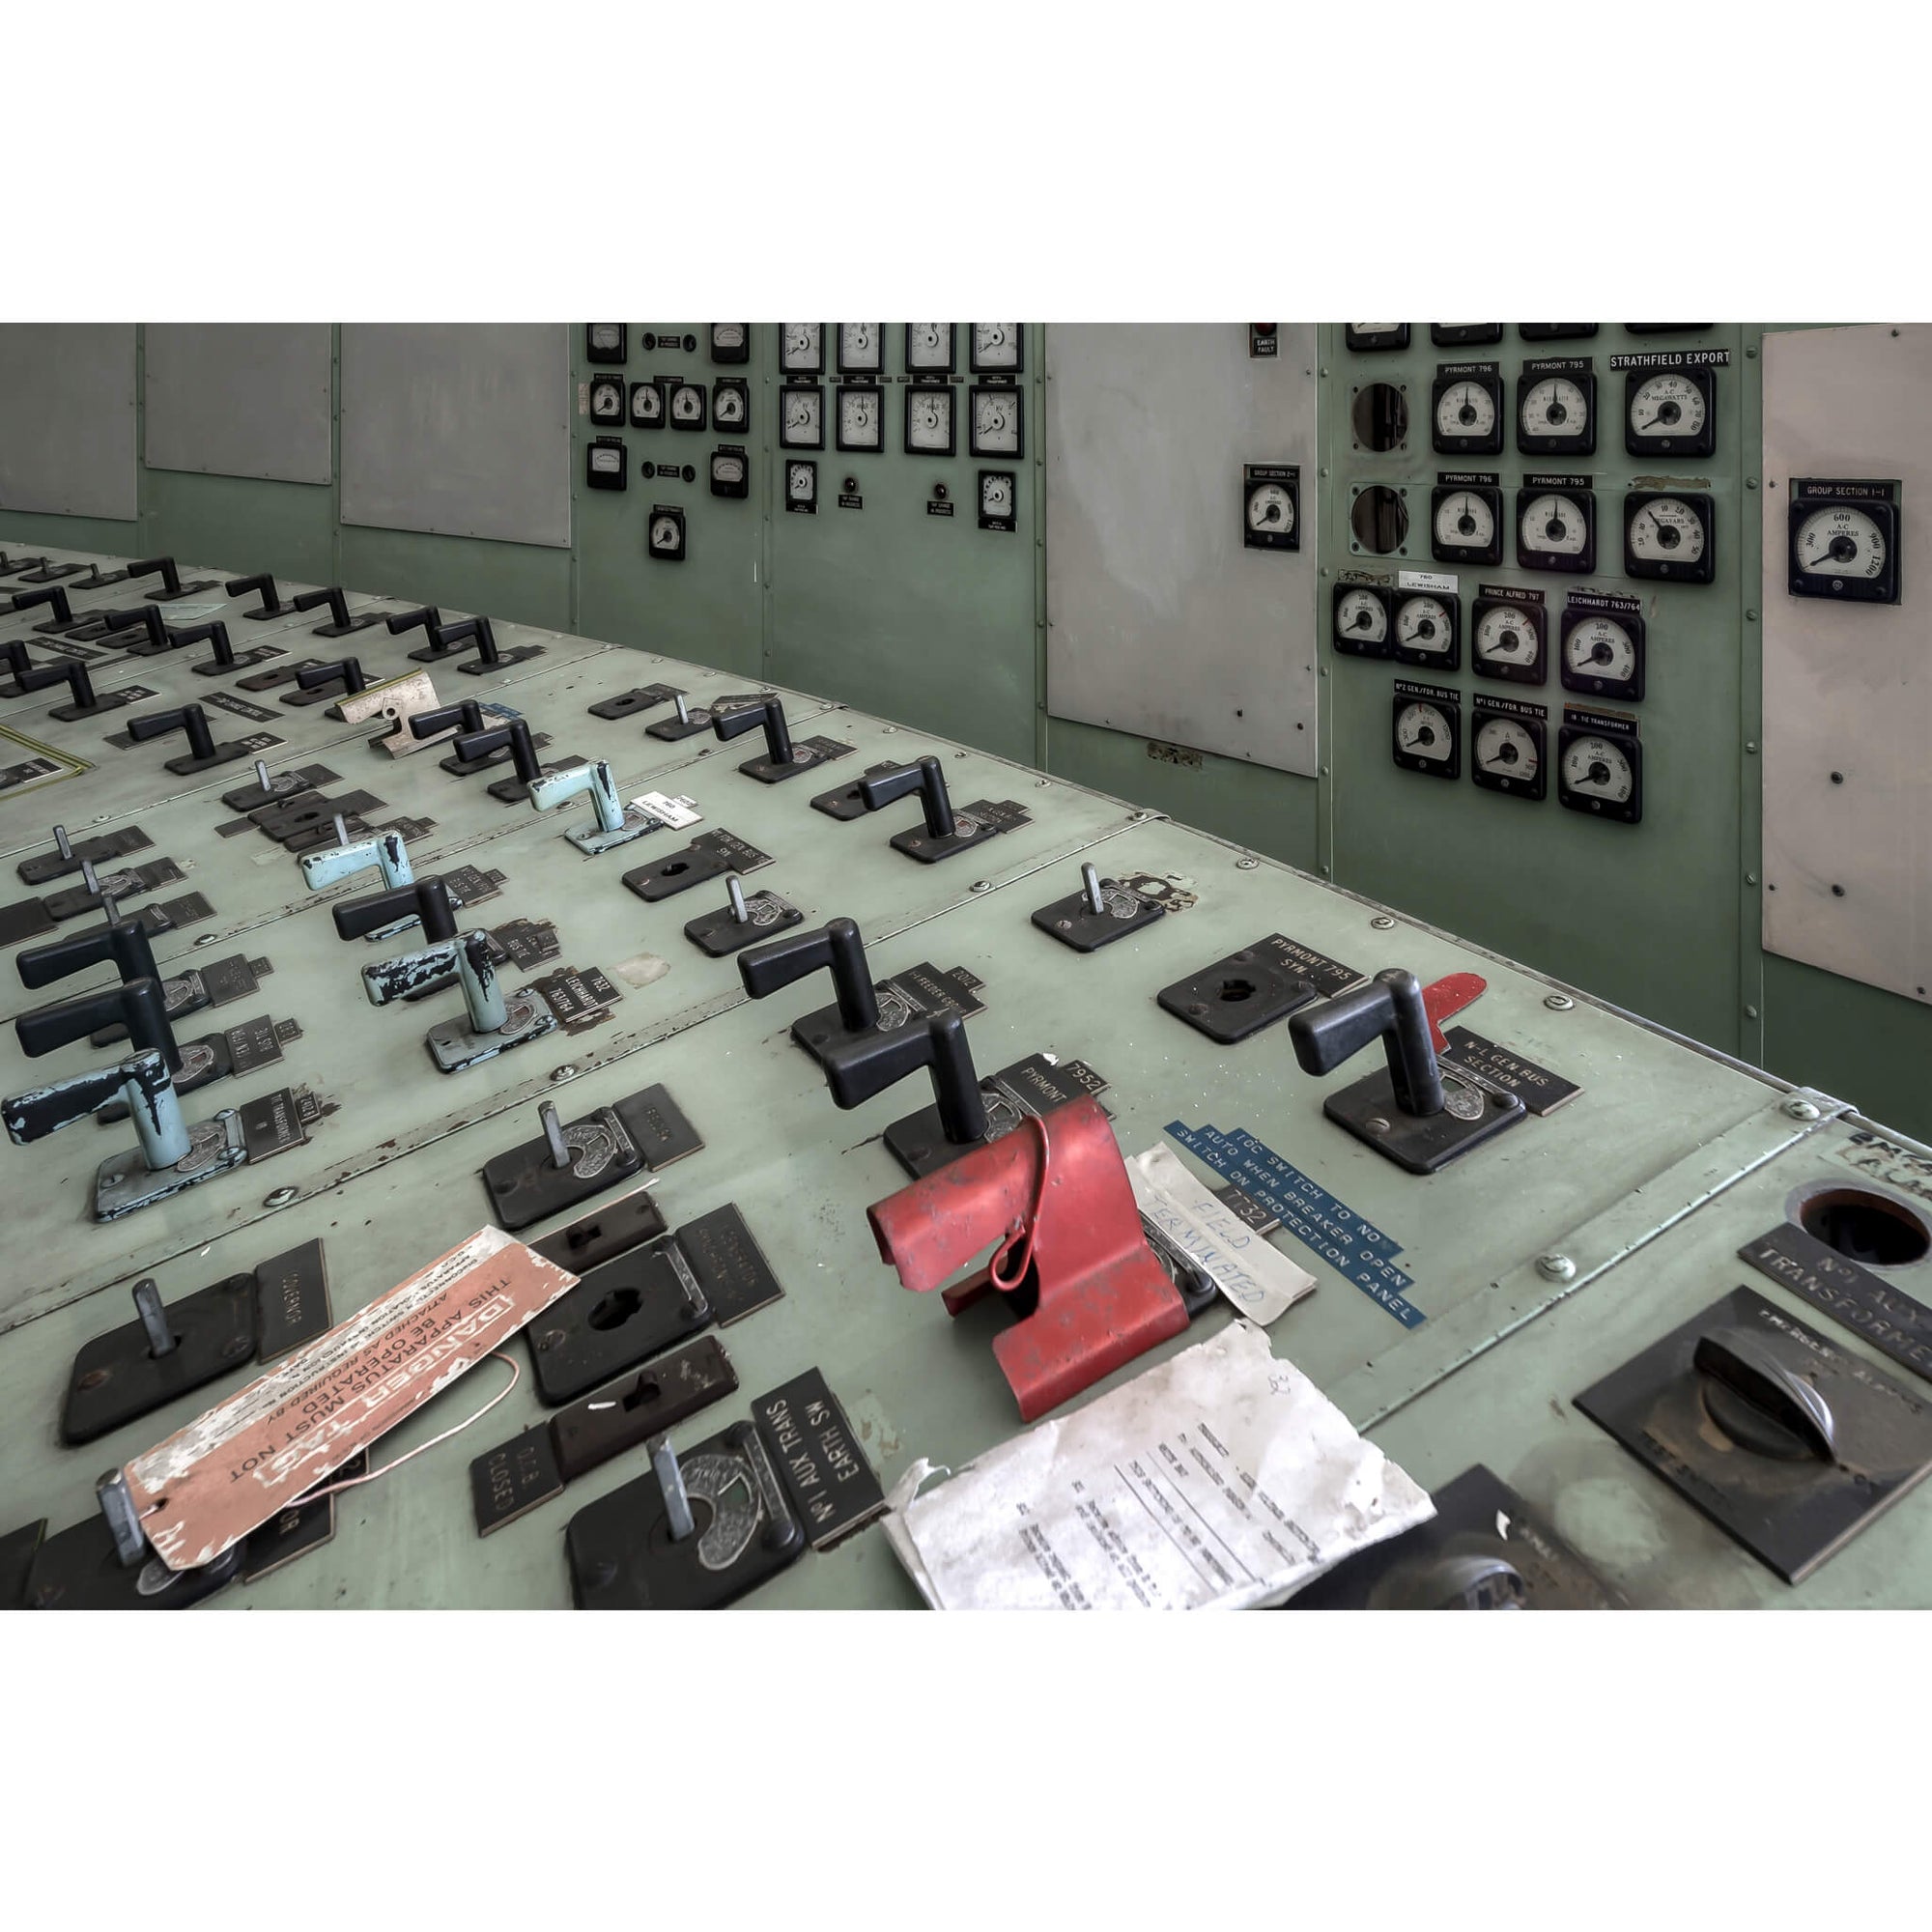 Control Room Switches | White Bay Power Station